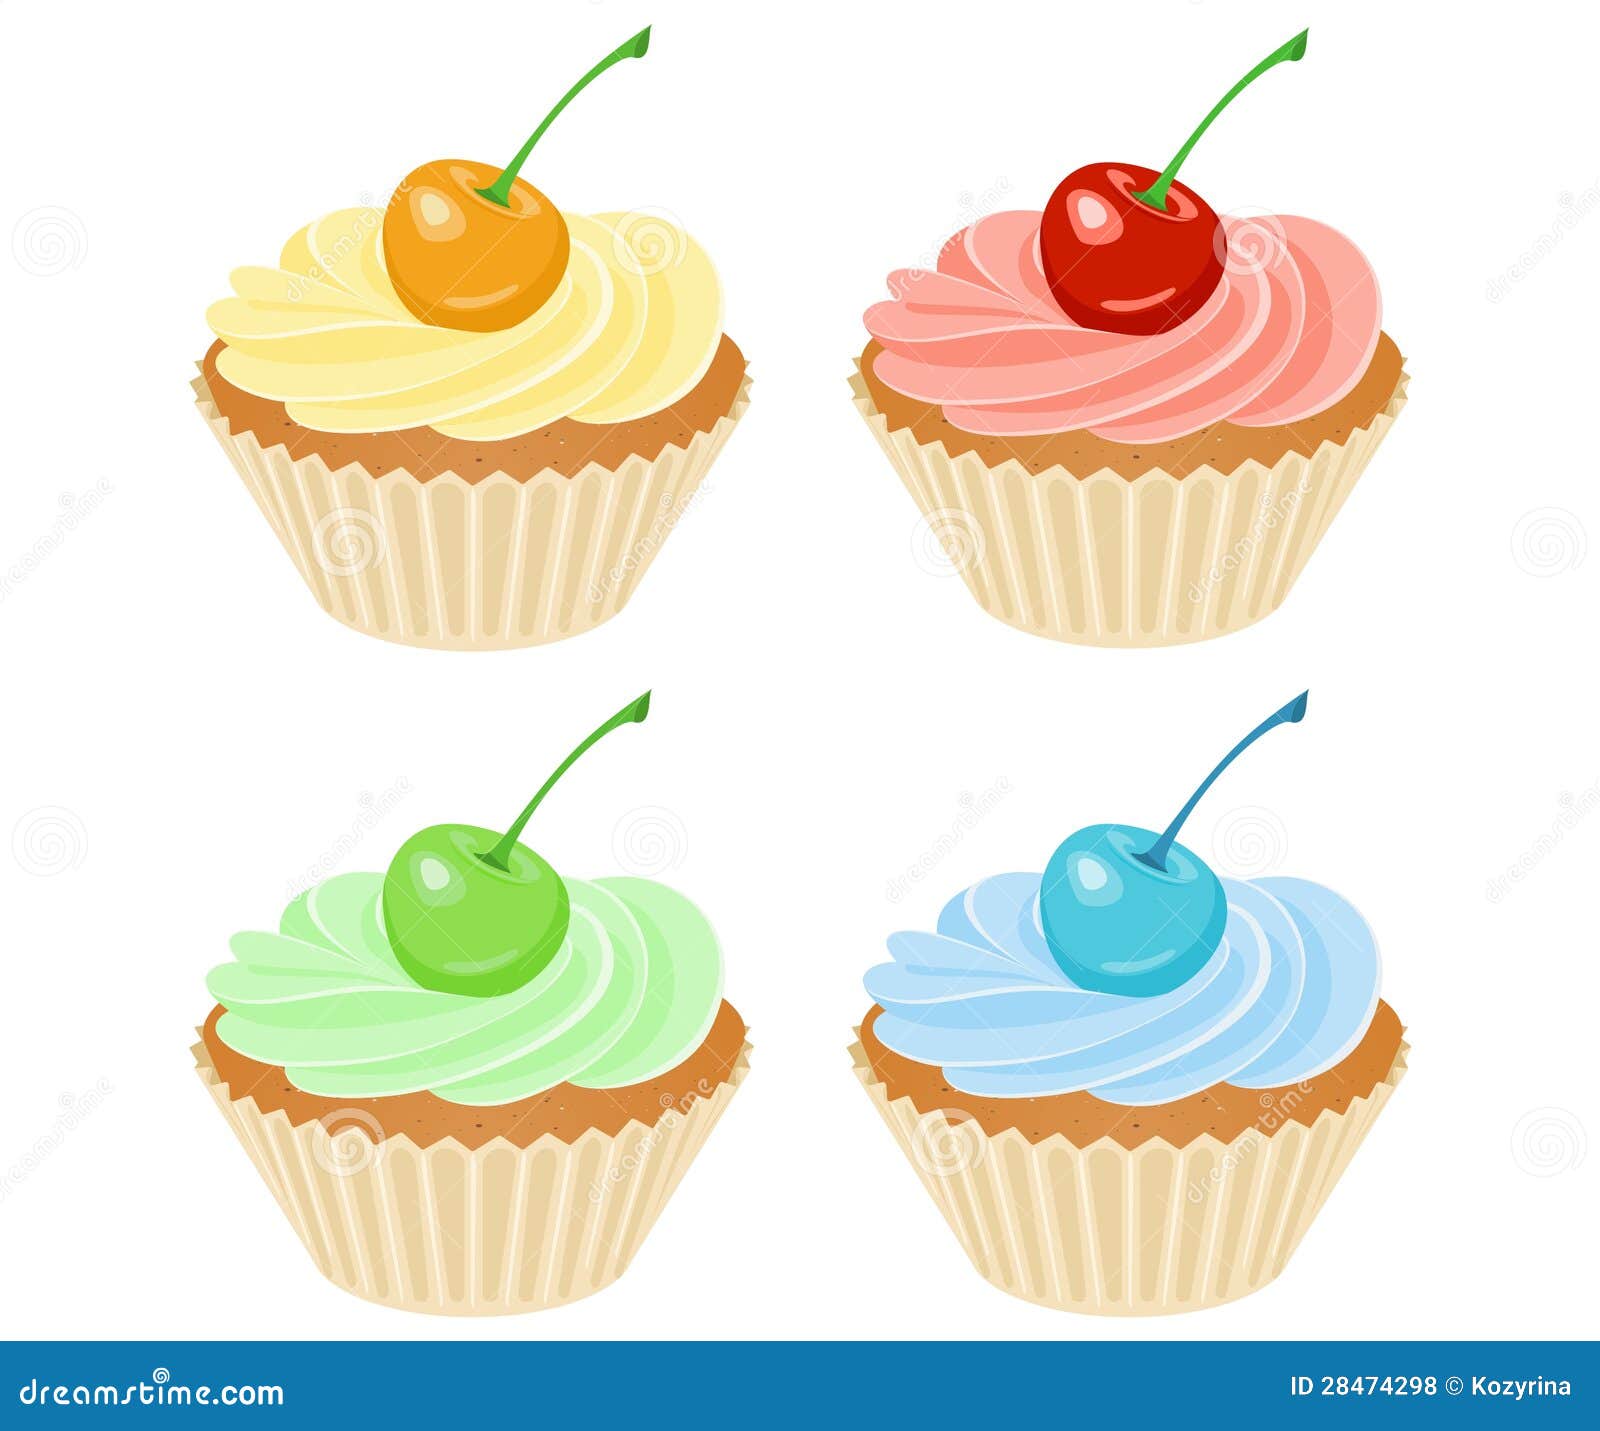 Vector cupcakes stock vector. Illustration of pink, yellow - 28474298